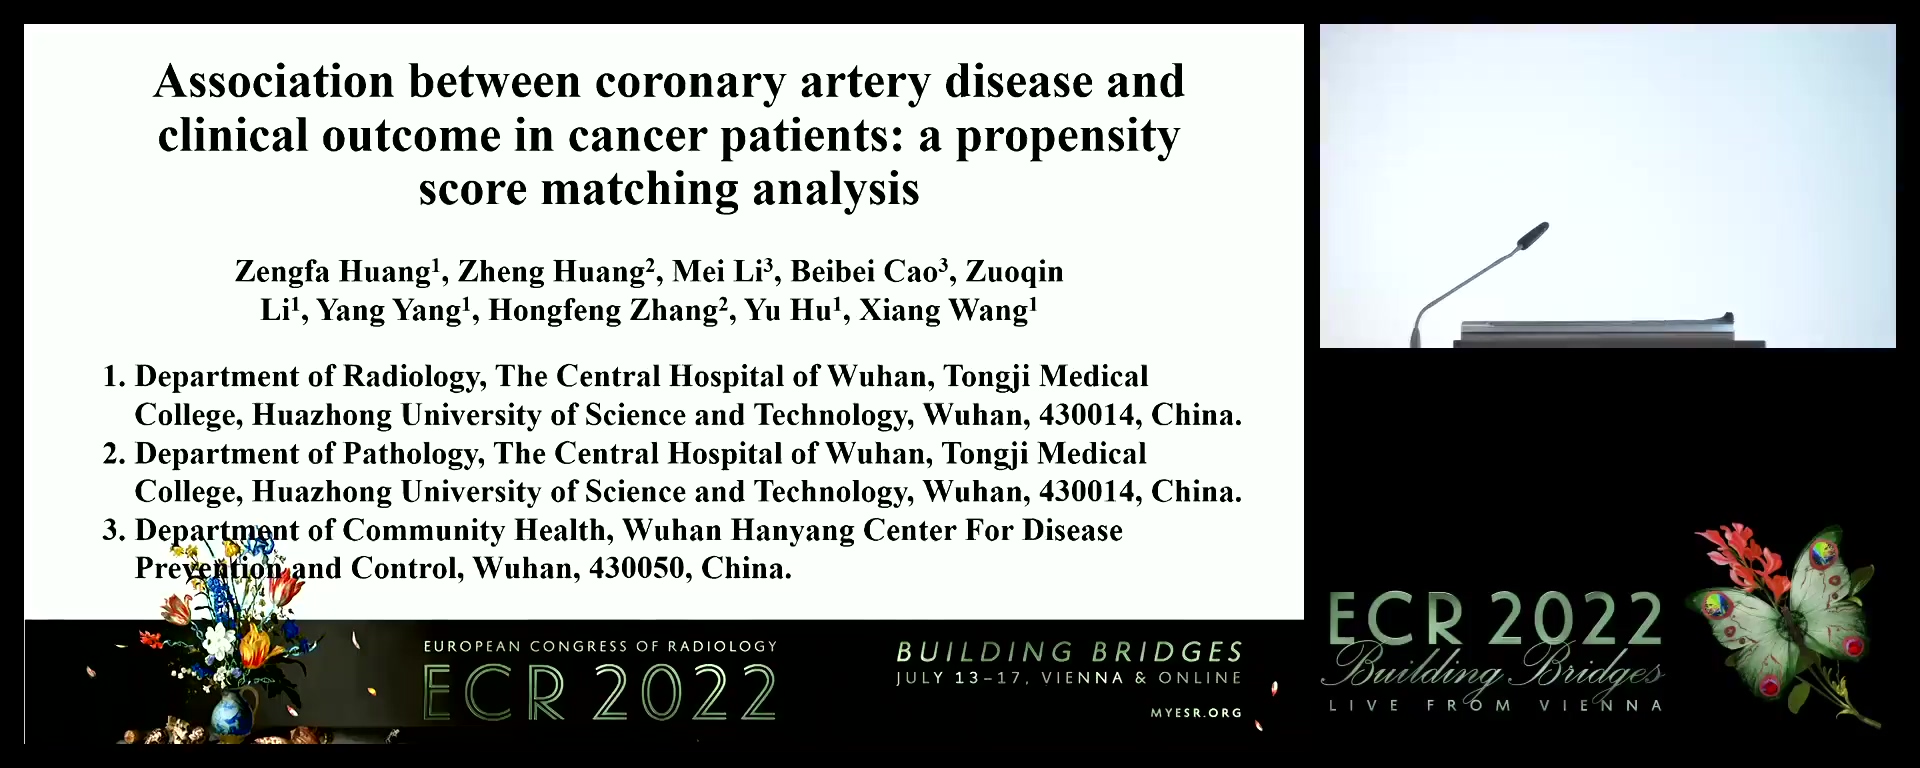 Association between coronary artery disease and clinical outcome in cancer patients: a propensity score matching analysis - Zengfa Huang, Wuhan / CN